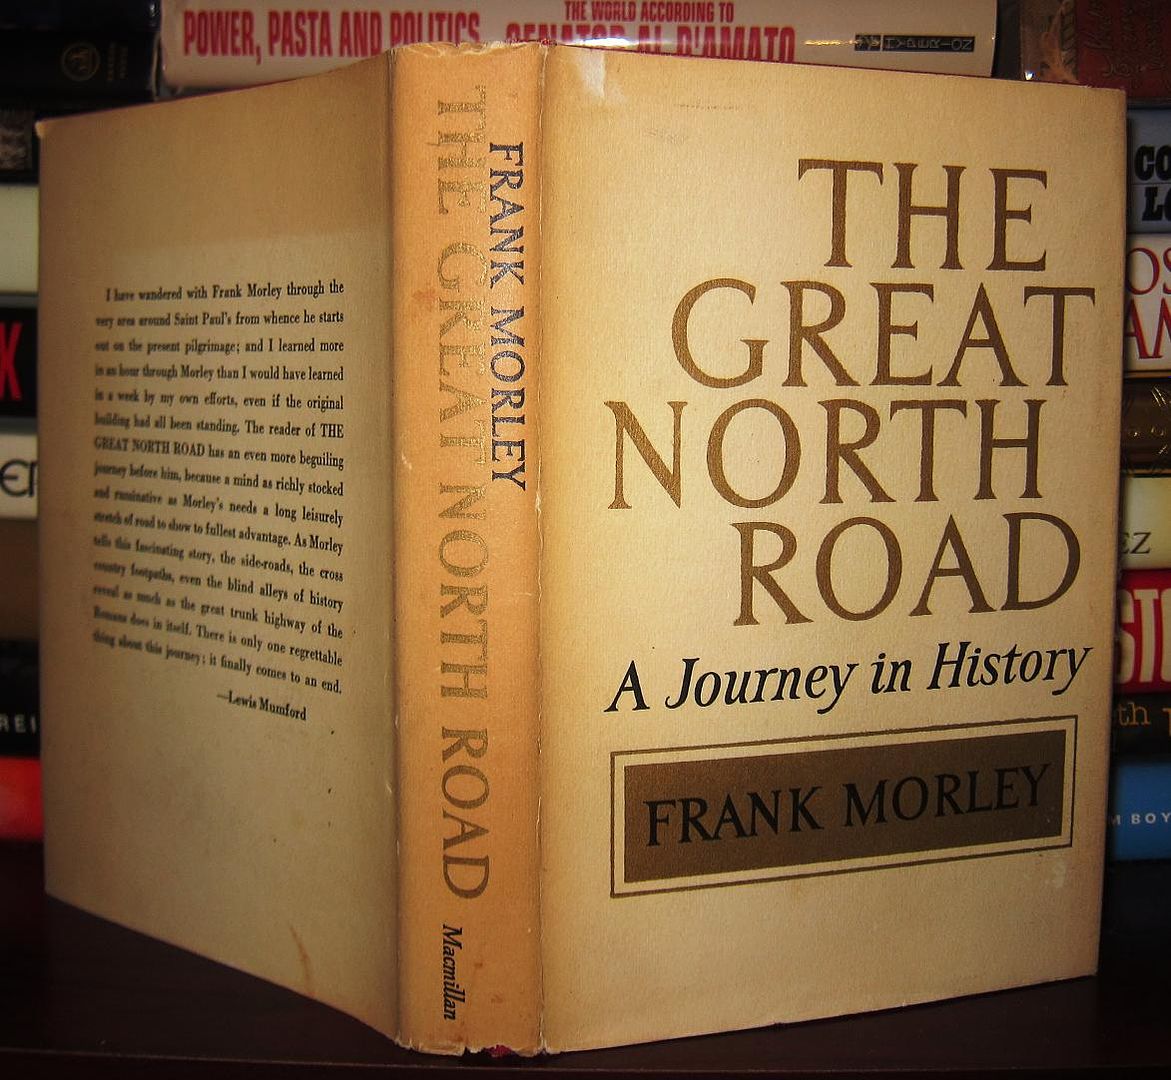 MORLEY, FRANK - The Great North Road